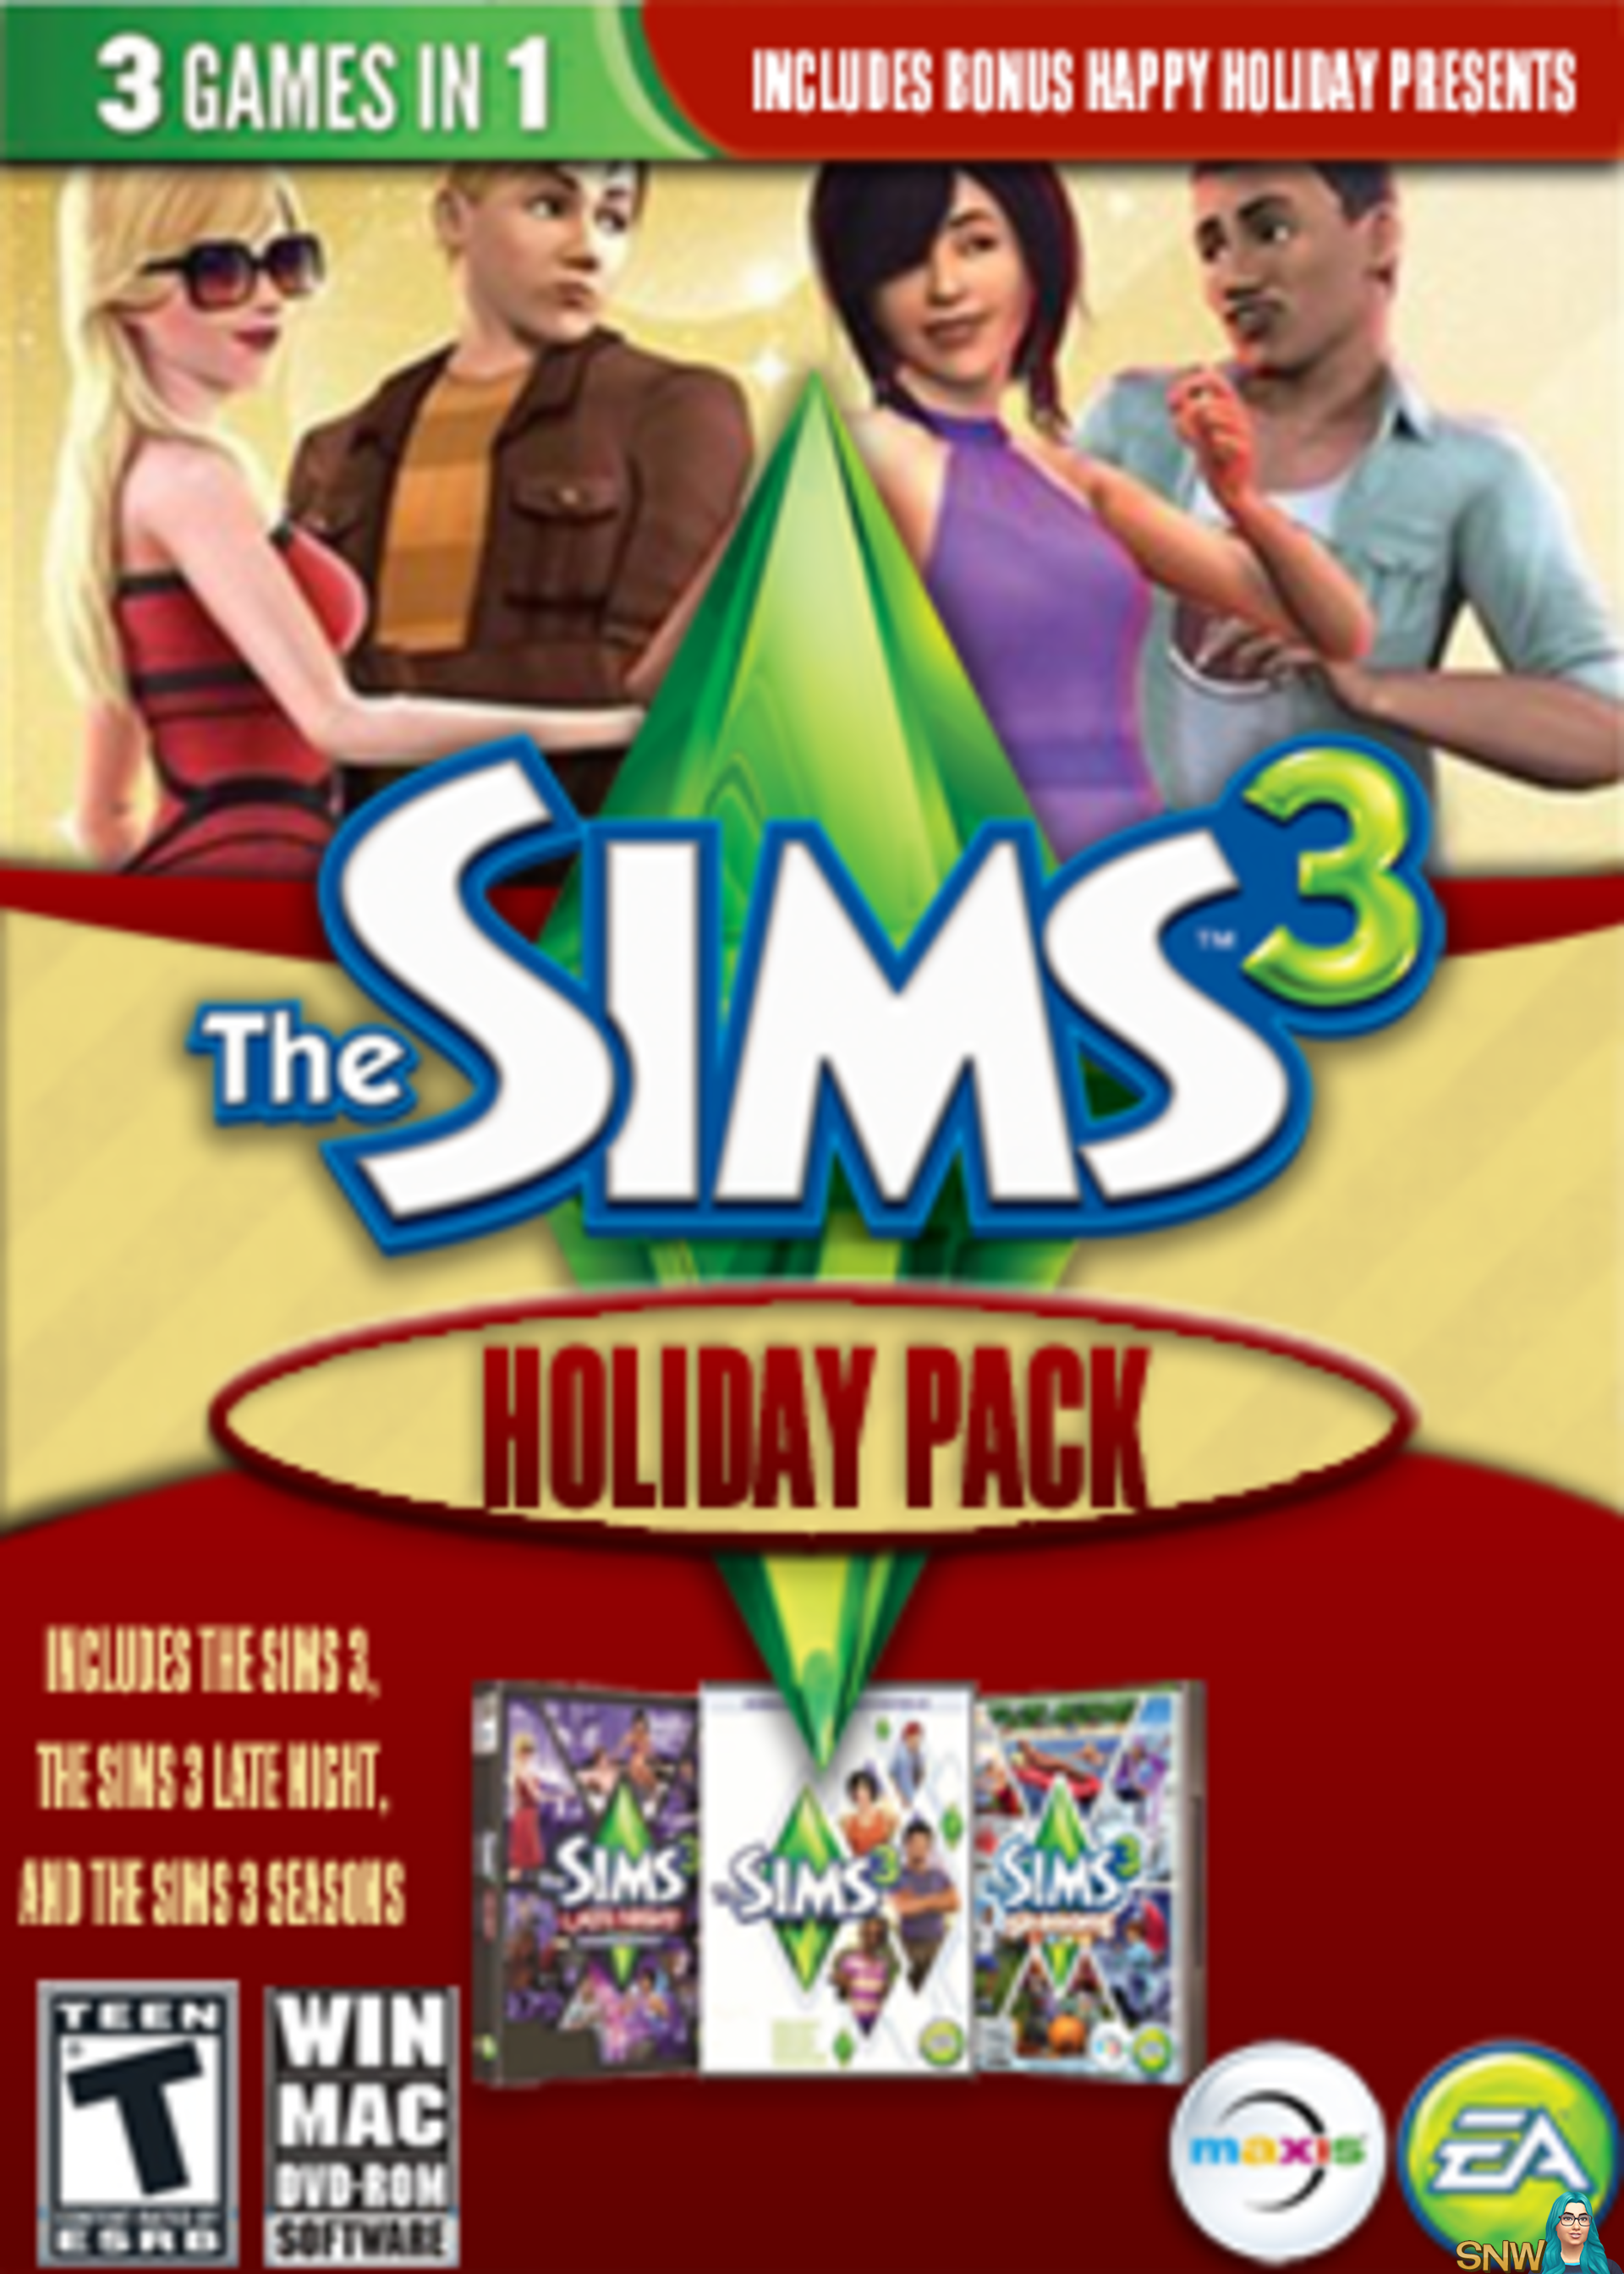 the sims 3 cc expansion packs